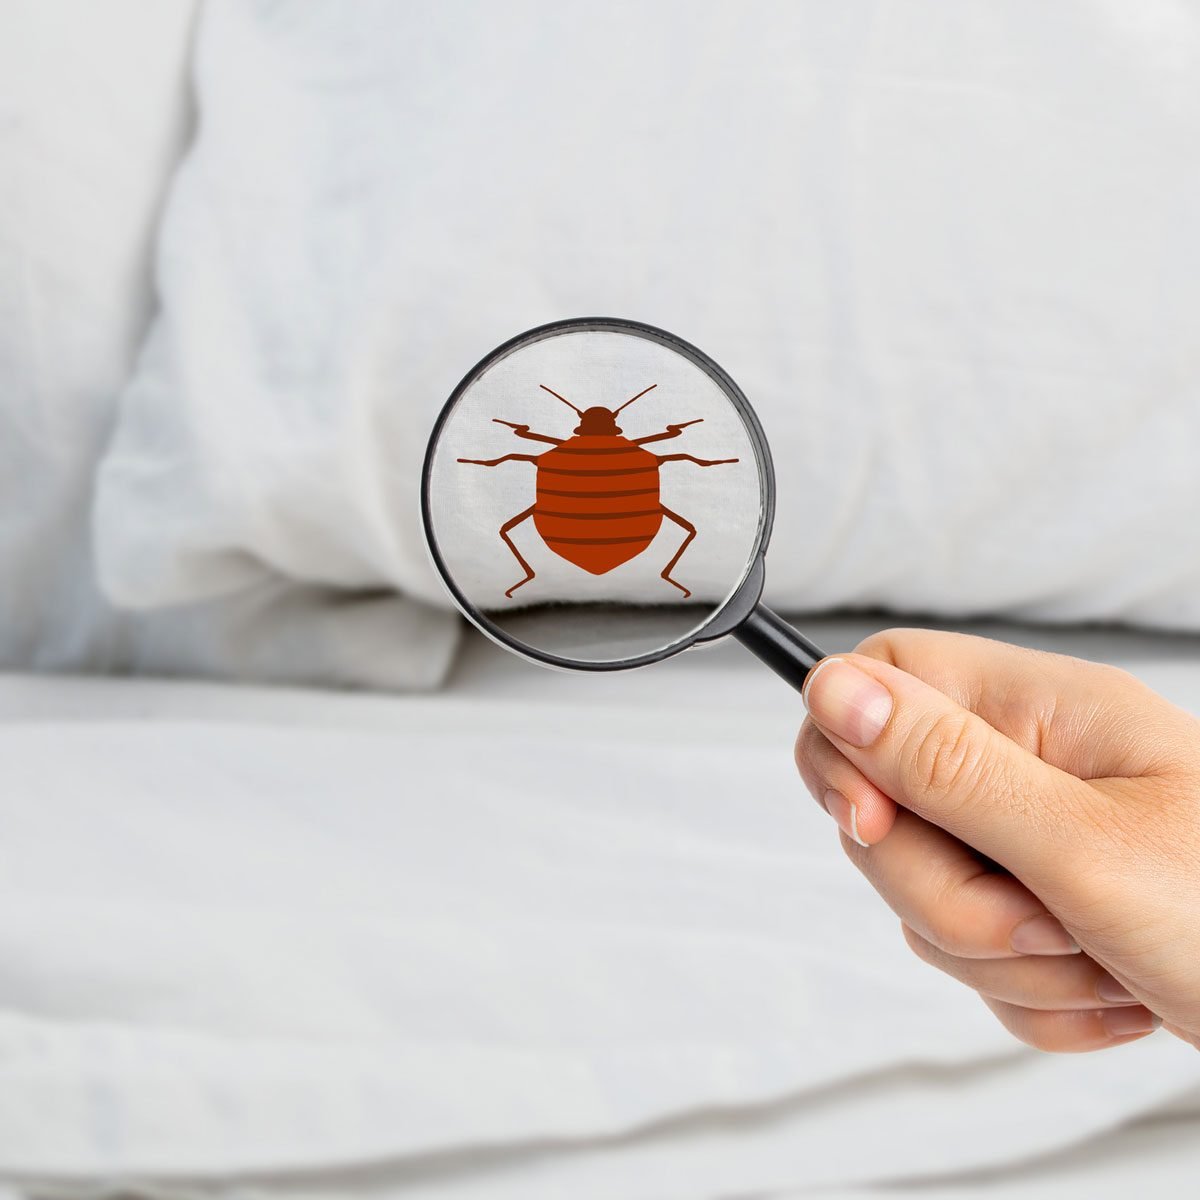 Are Bed Bugs Dangerous to People, Pets and Property?